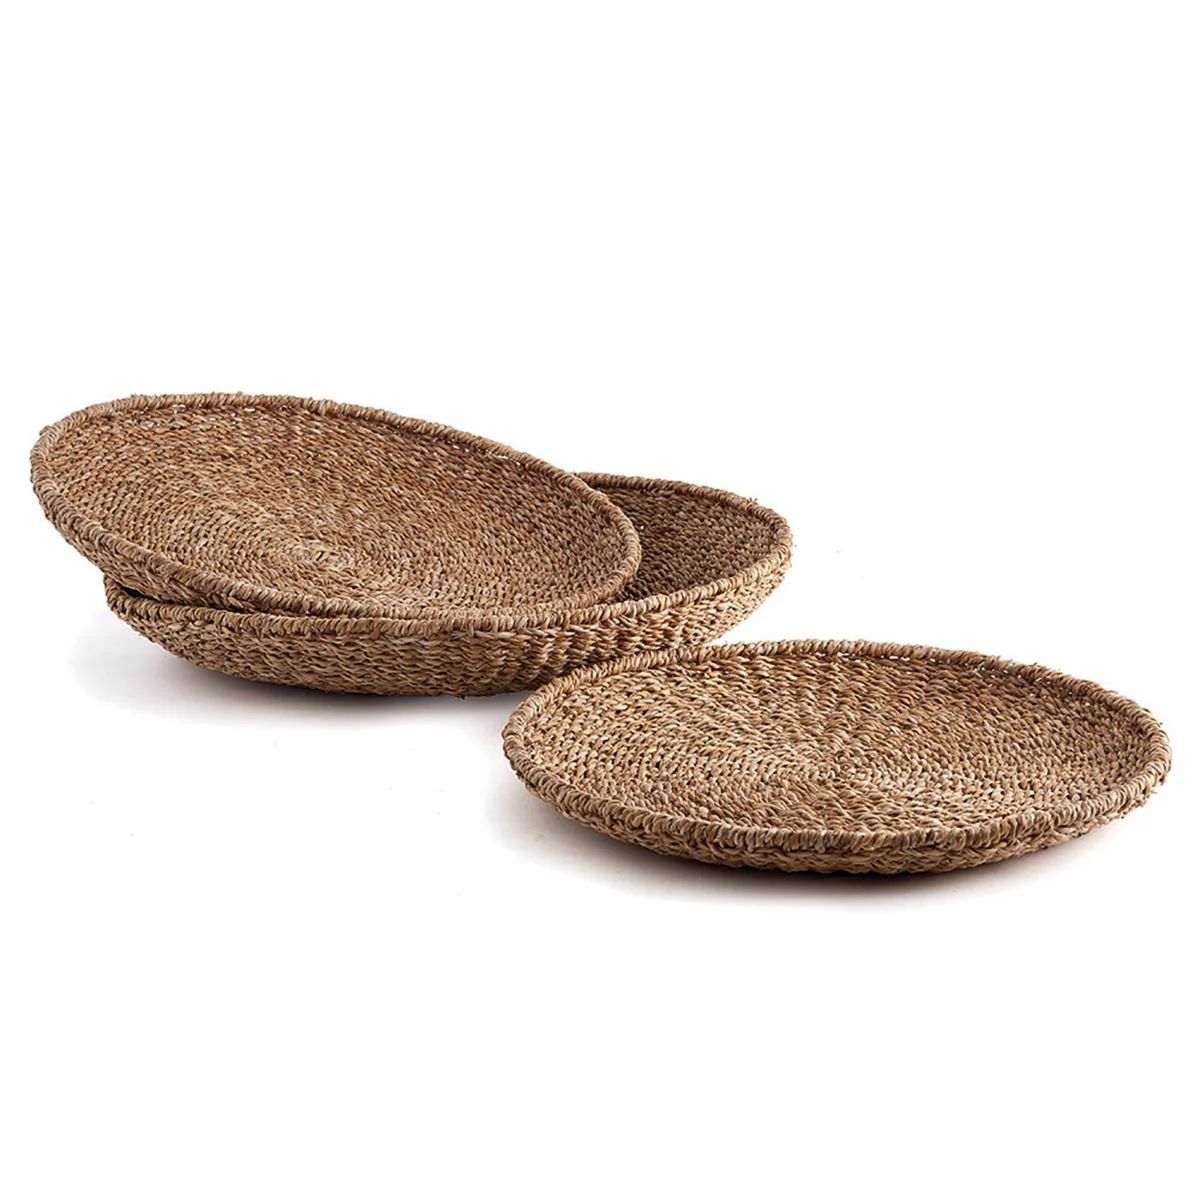 SEAGRASS ROUND FLAT TRAY | Linen & Flax Co